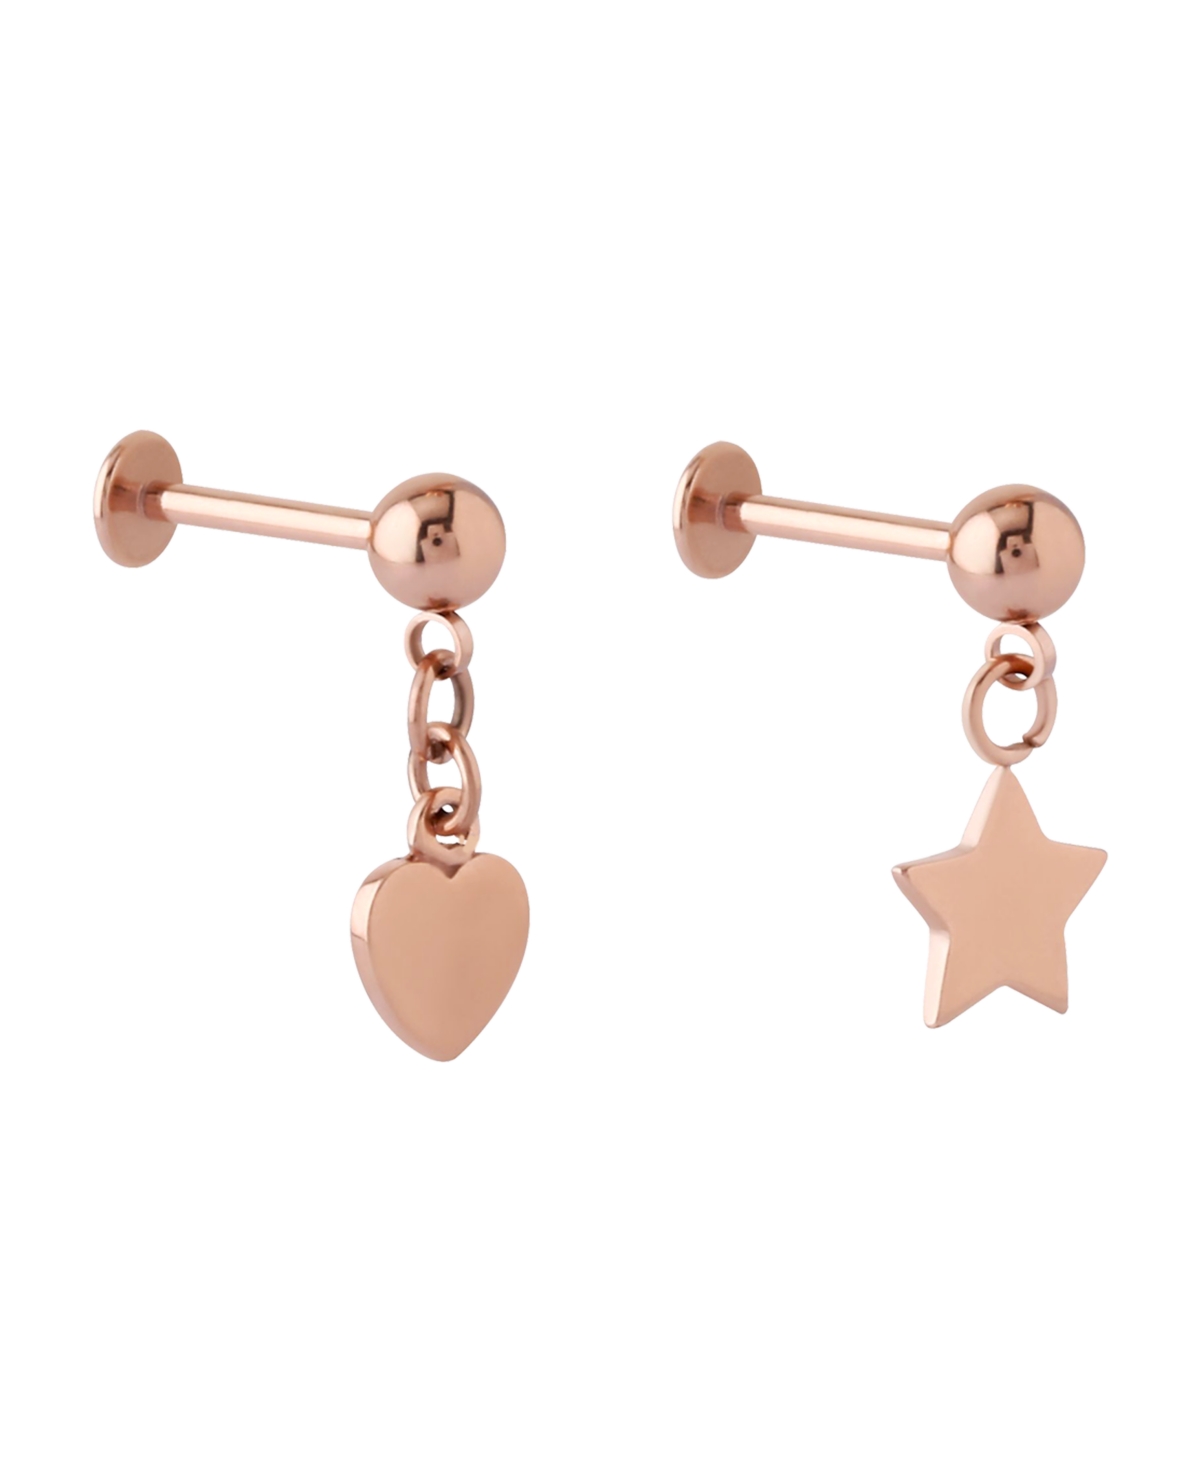 Bodifine Stainless Steel Set of 2 Drop Charm Tragus - Rose Gold